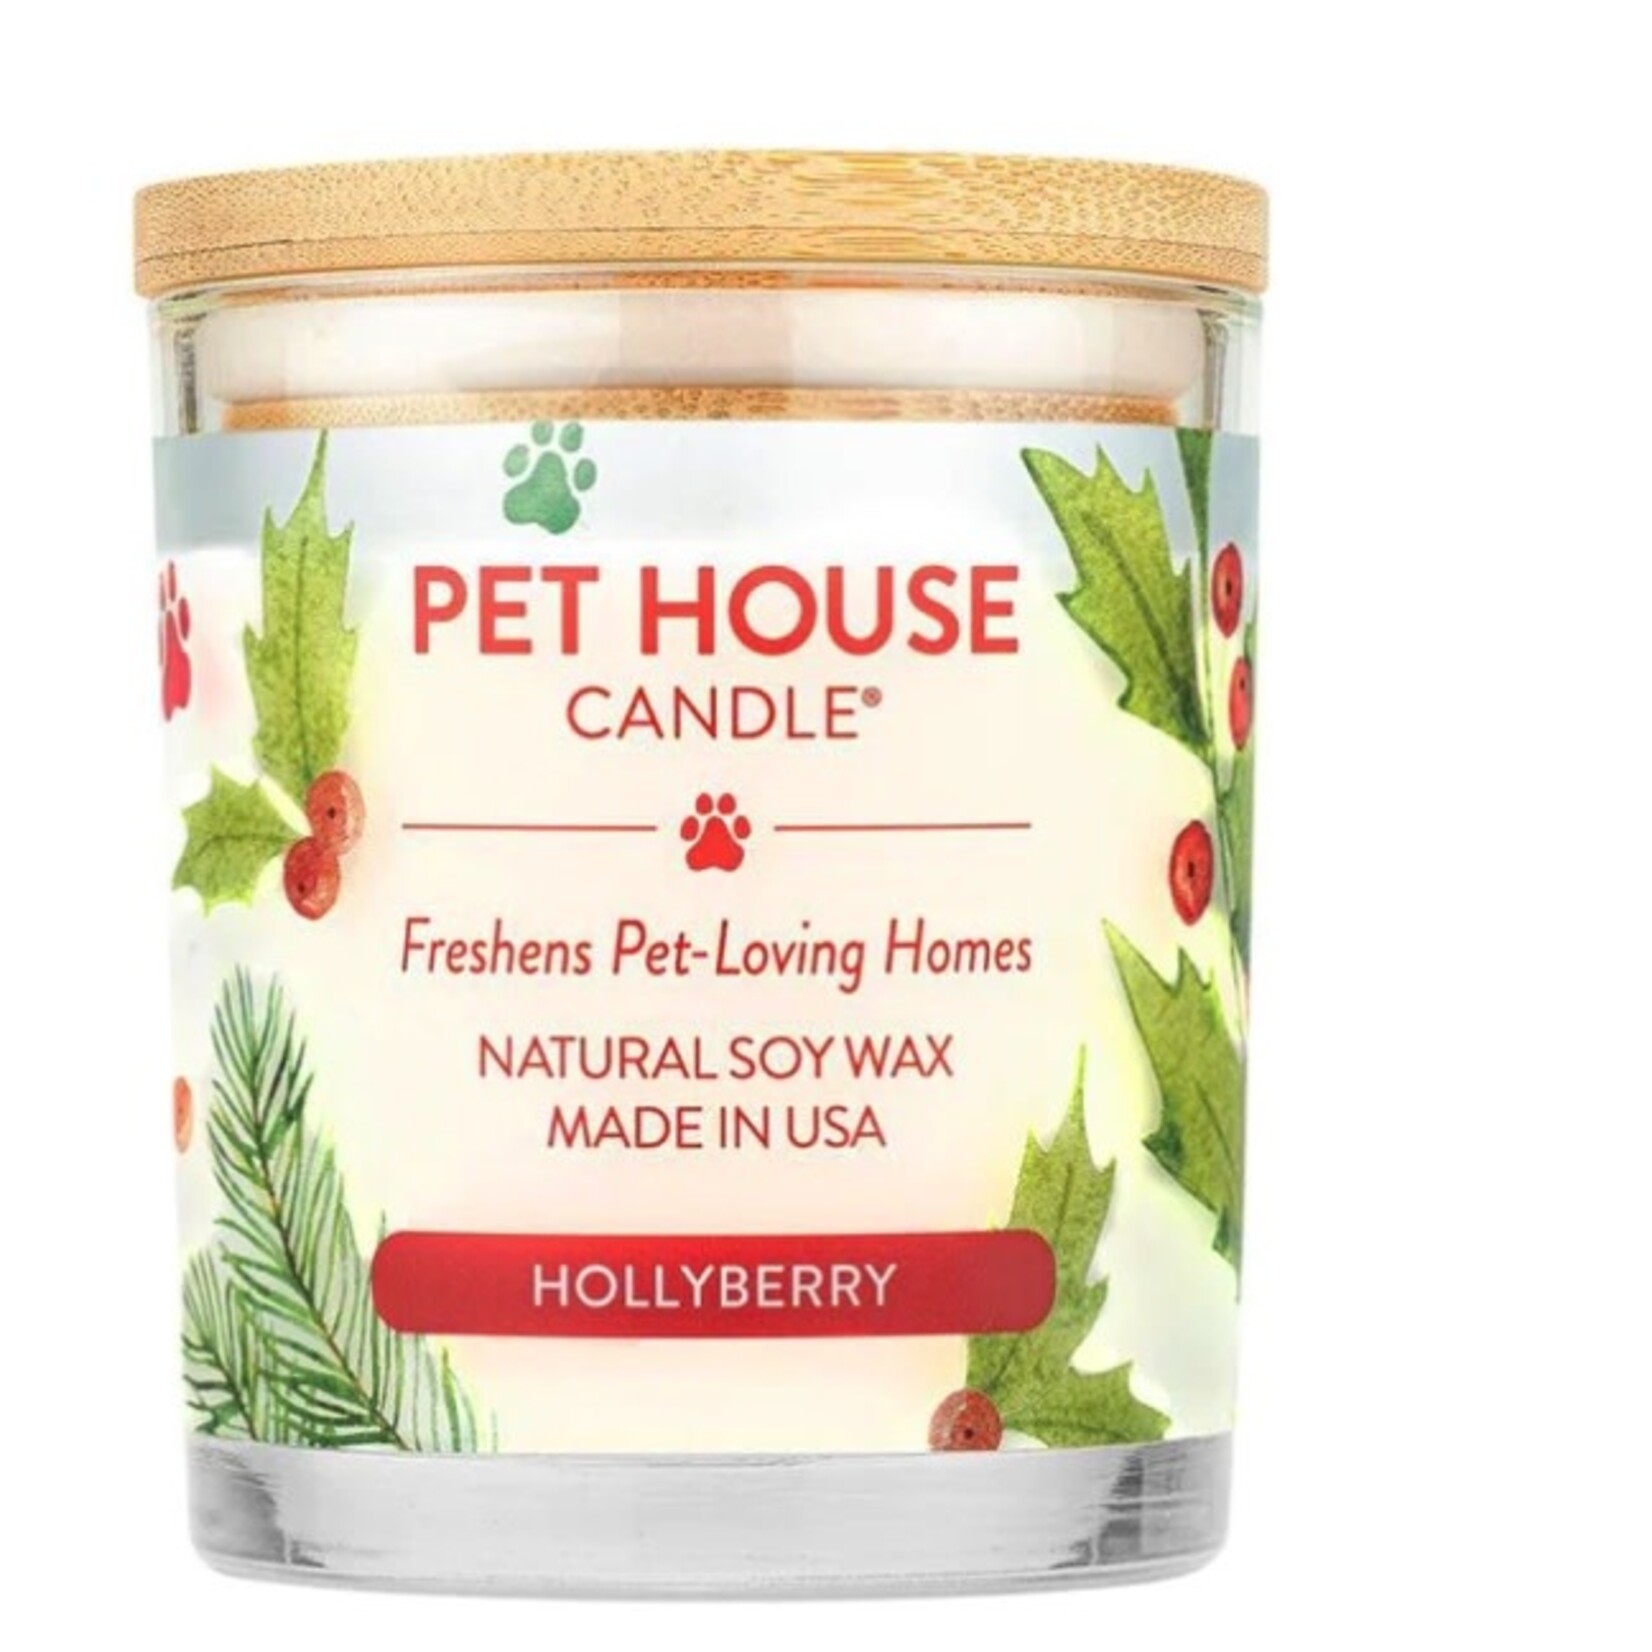 PET HOUSE CANDLE Pet House Candle Hollyberry